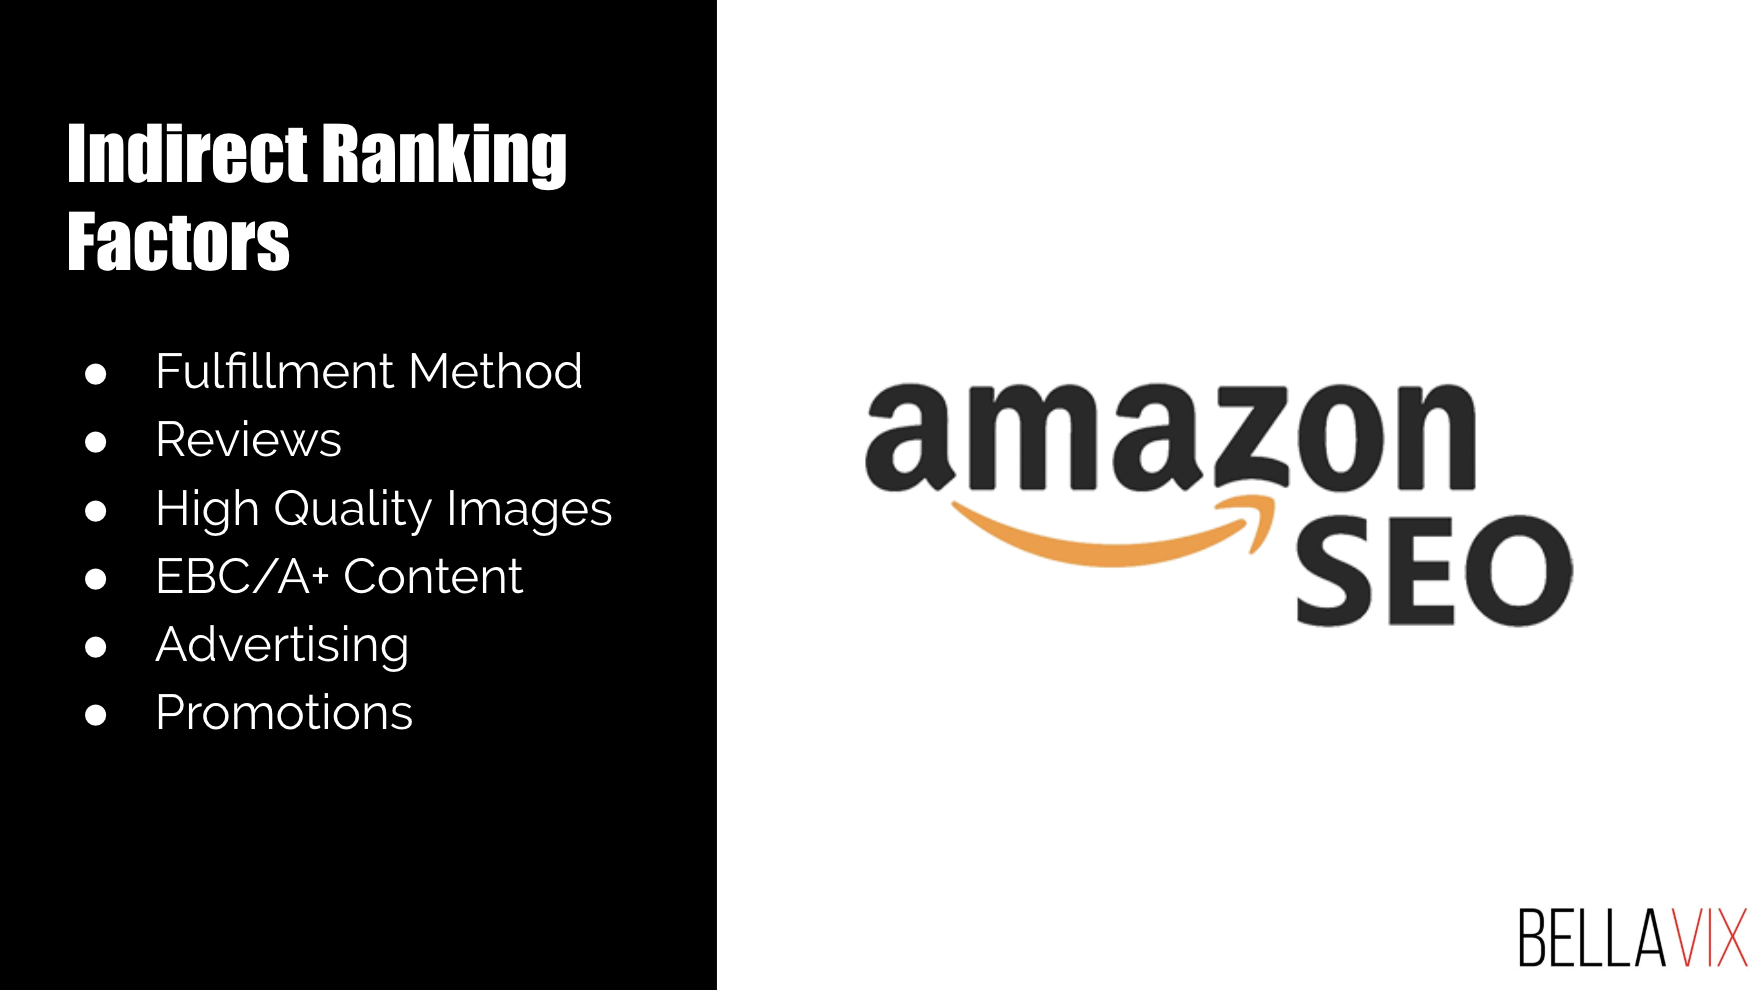 Amazon SEO - Indirect Factors for Product Ranking